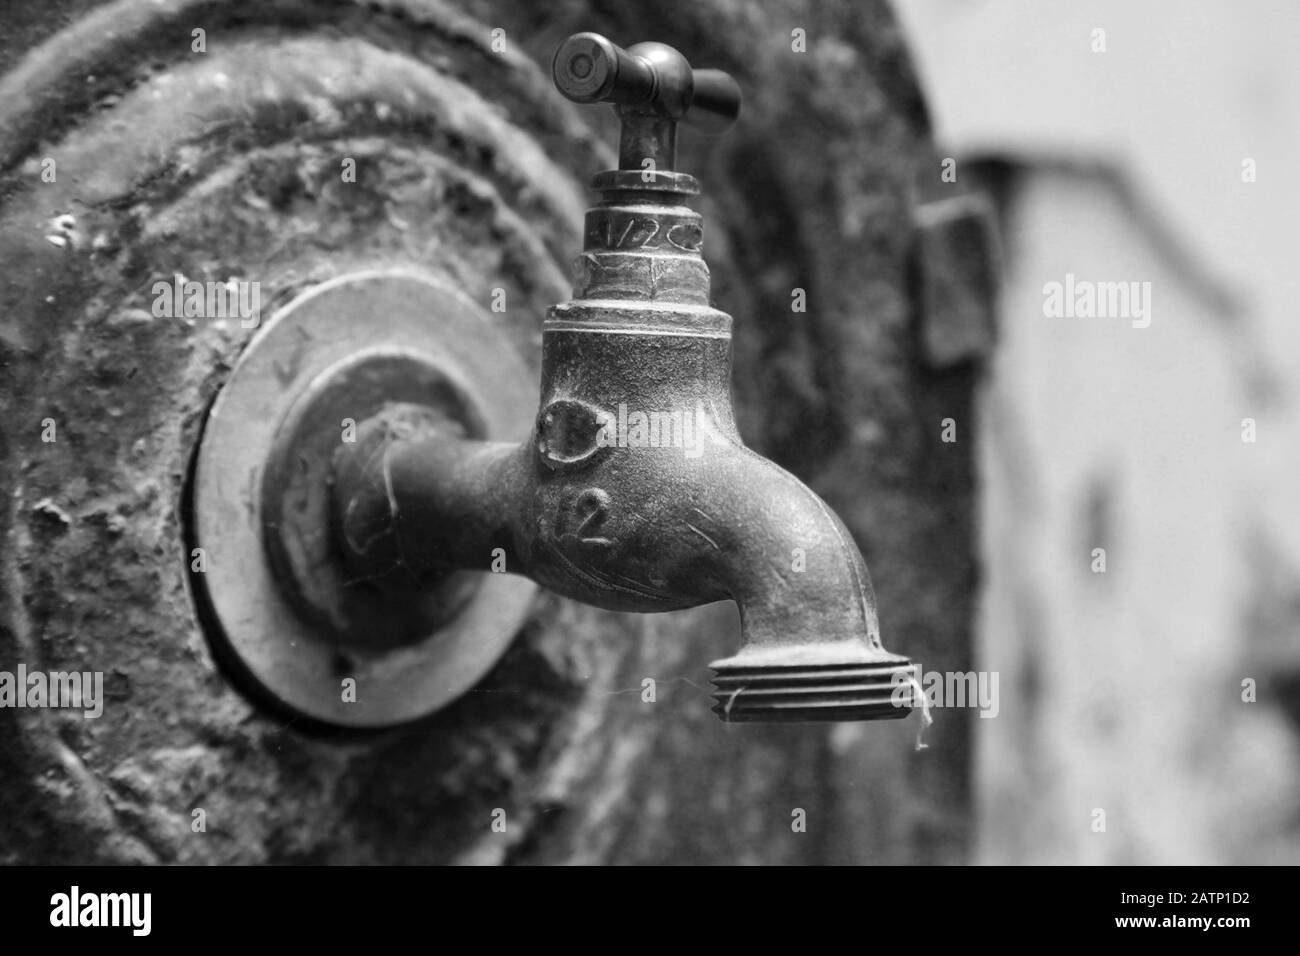 Closeup photo of old outdoor water valve. Black and white Stock Photo